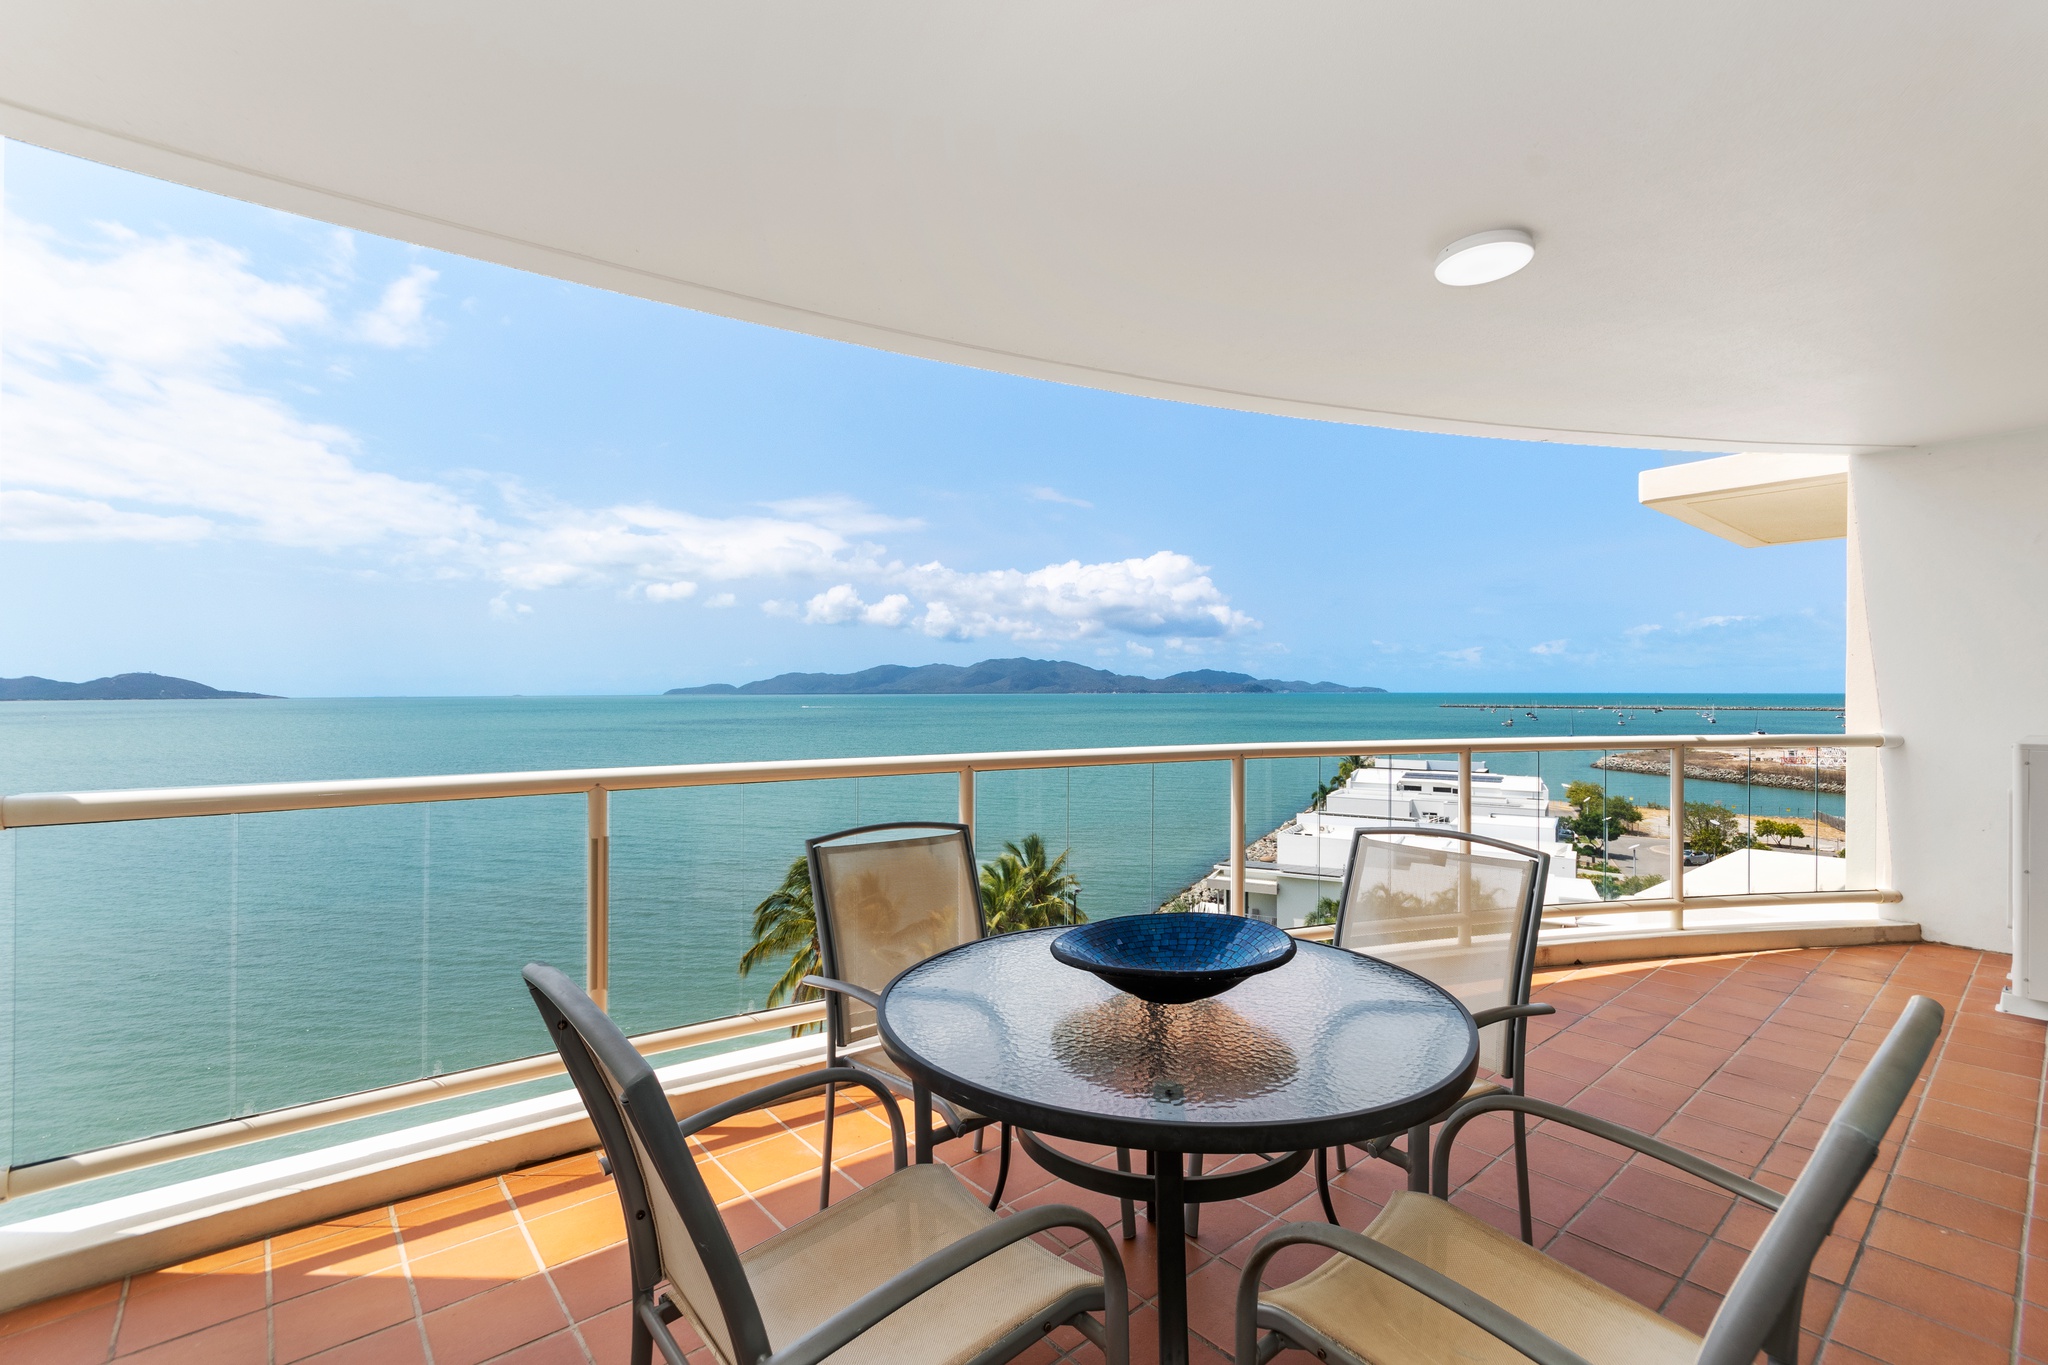 2 Bedroom Accommodation Townsville Ocean Views